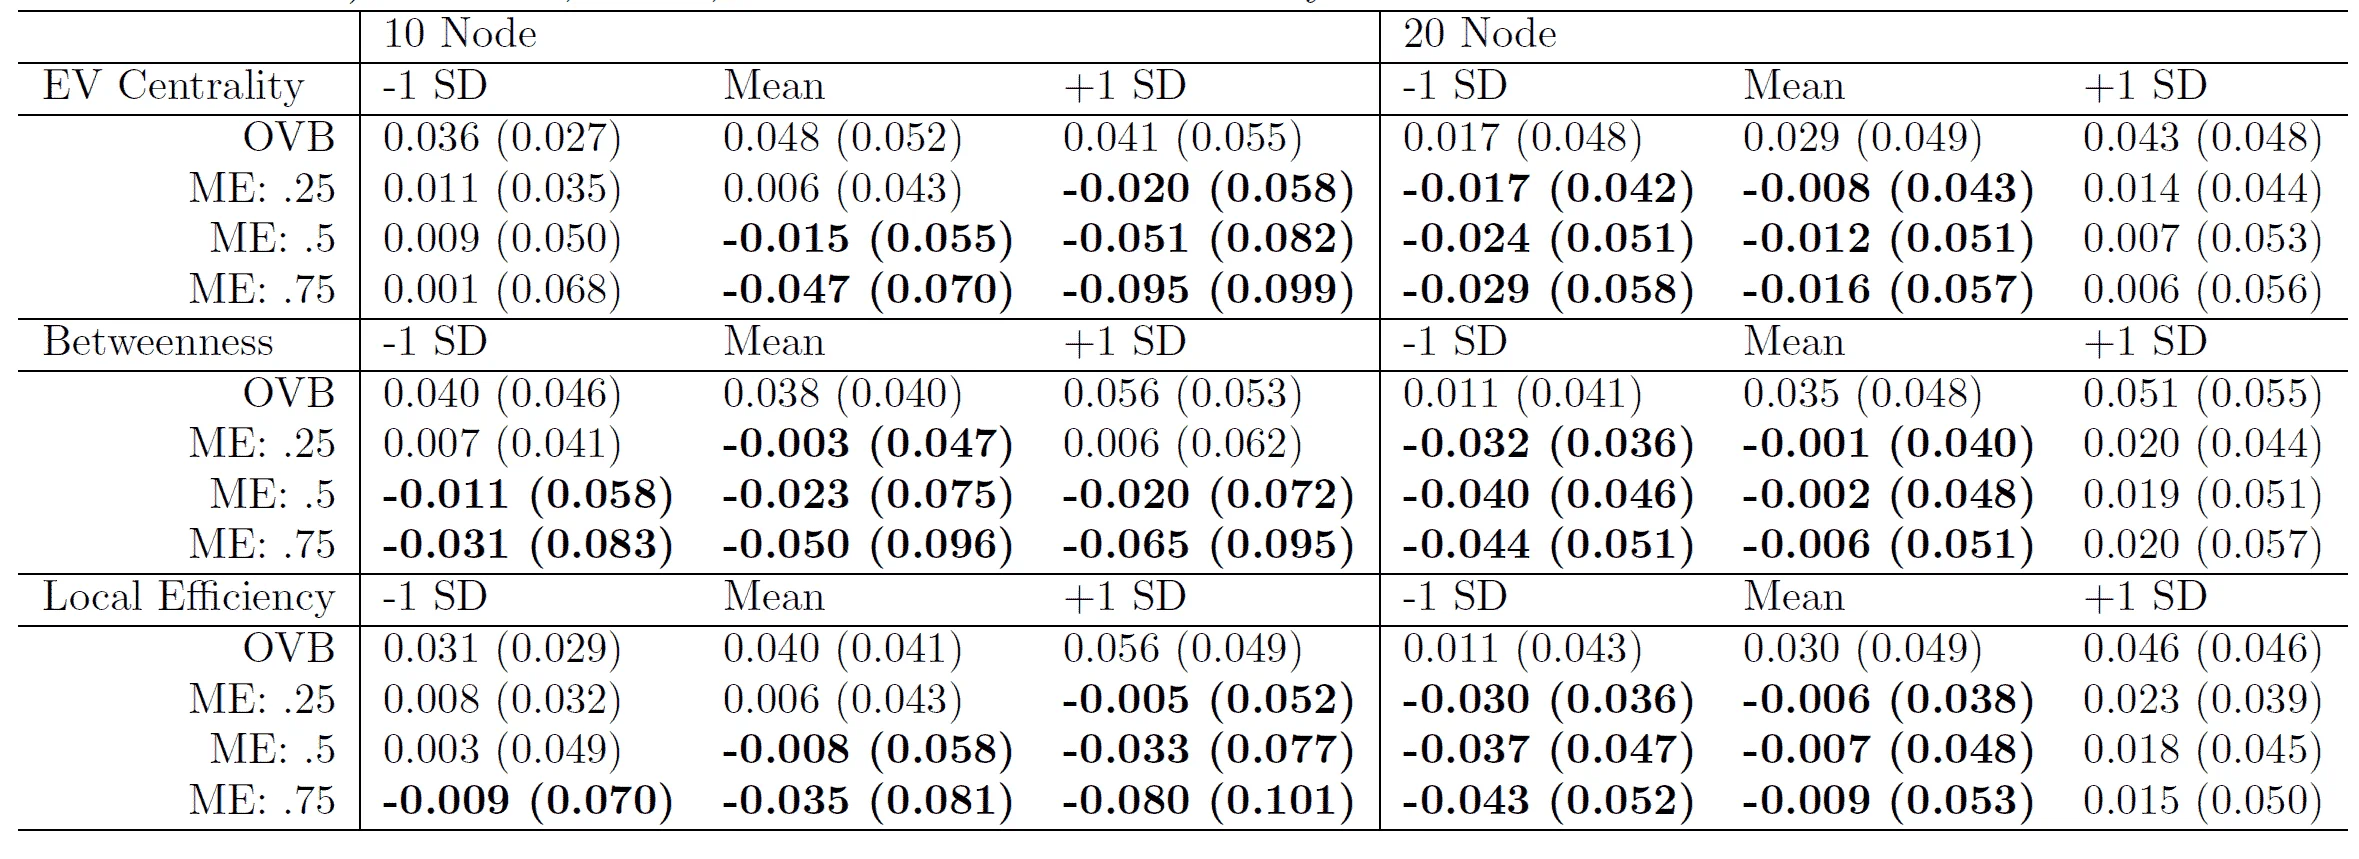 Table displaying sensitivity comparisons between EBICglasso and LoGo methods at a sample size of 200, with cell values represented as means and standard deviations, highlighting areas where LoGo outperforms EBICglasso.